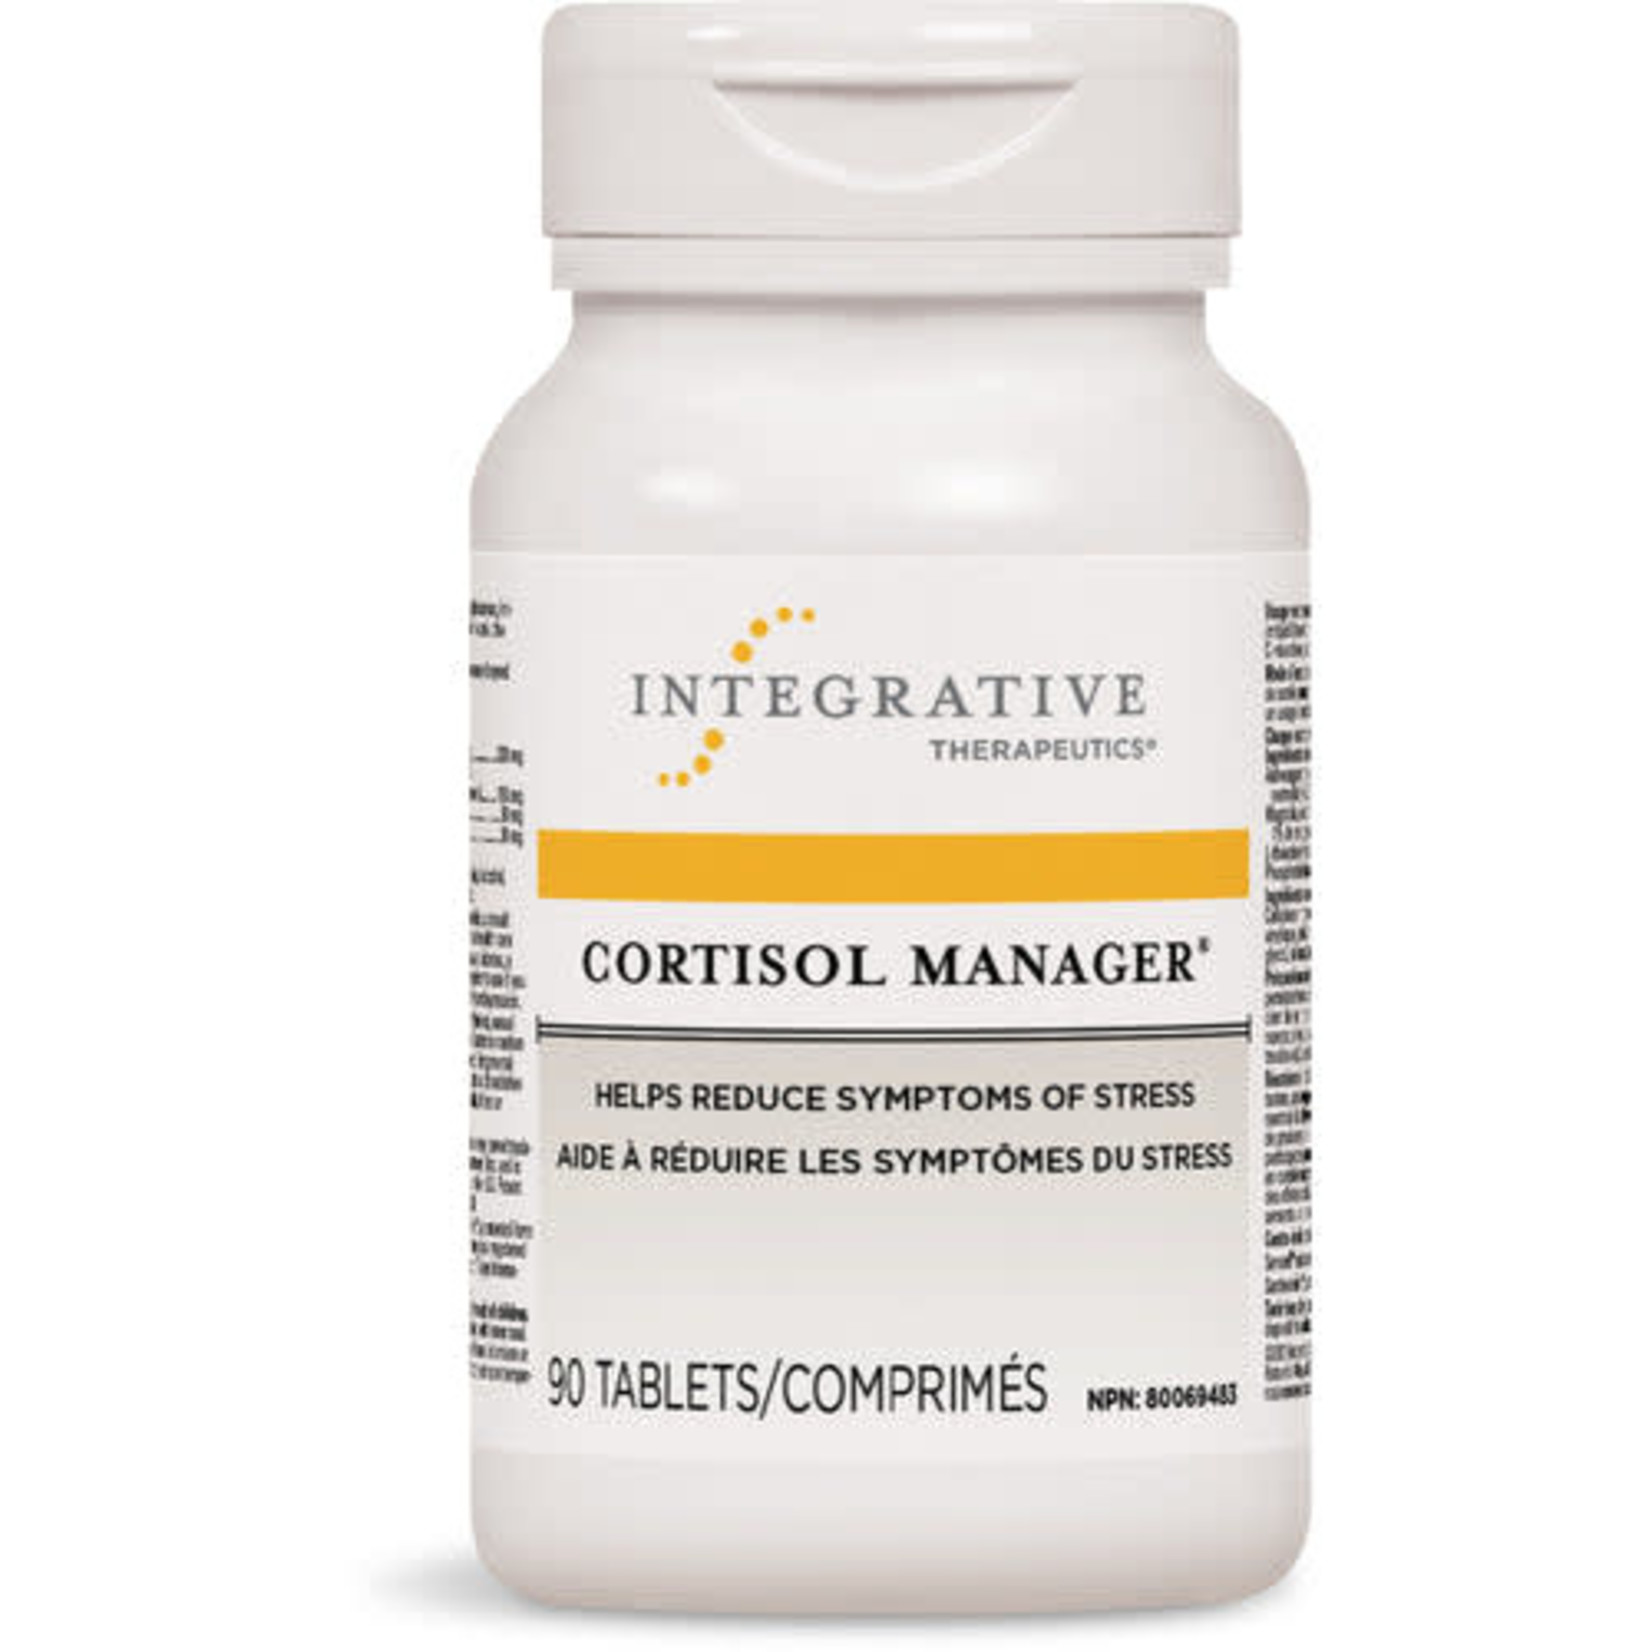 INTEGRATIVE THERAPEUTICS INTEGRATIVE THERAPEUTICS CORTISOL MANAGER 90 TABS